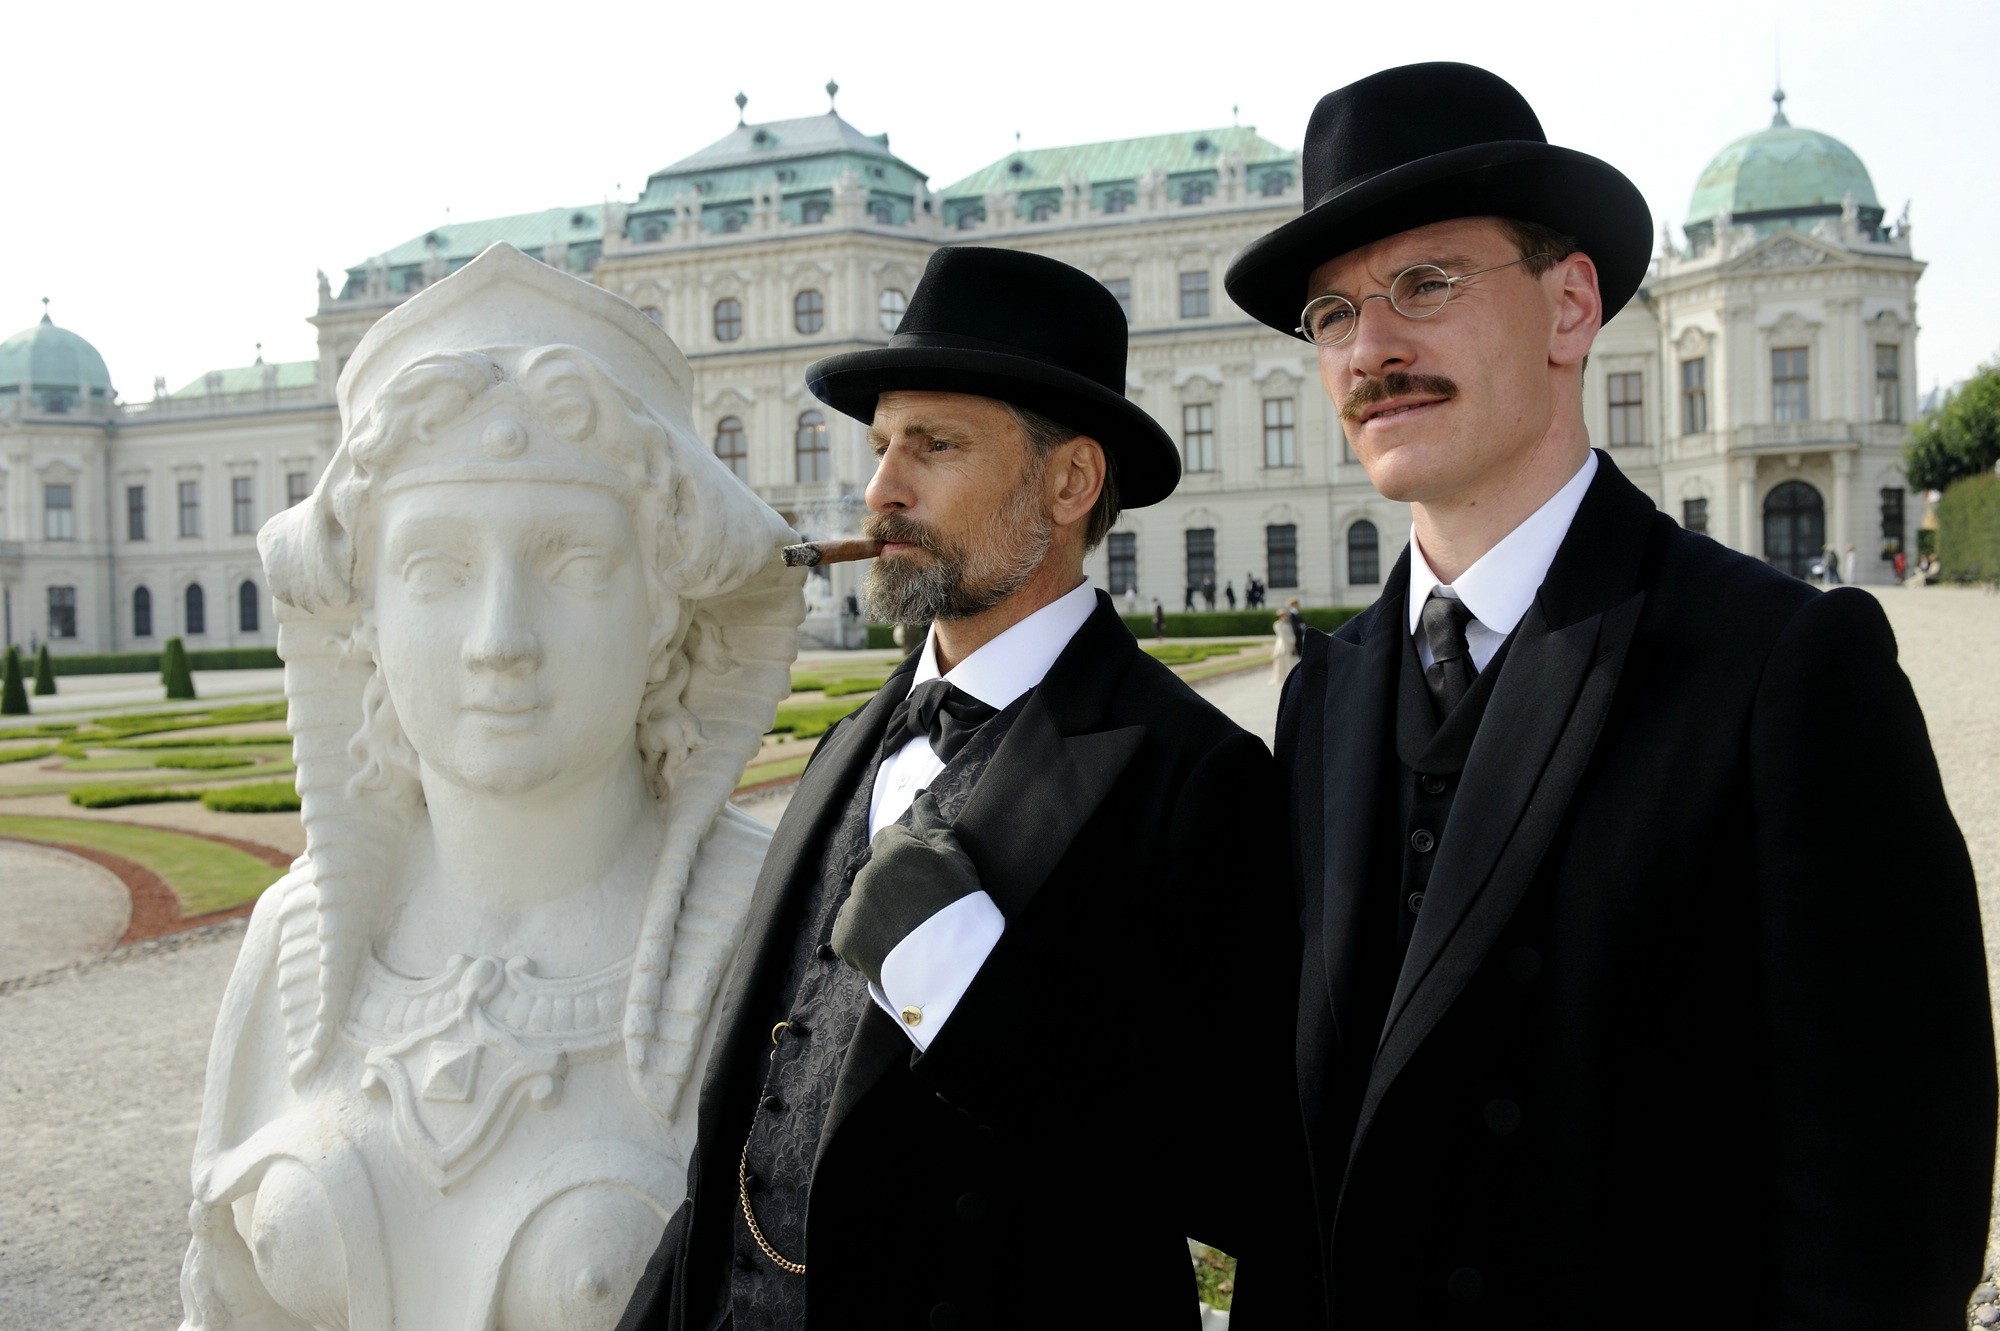 Viggo Mortensen stars as Sigmund Freud and Michael Fassbender stars as Carl Jung in Sony Pictures Classics' A Dangerous Method (2011)